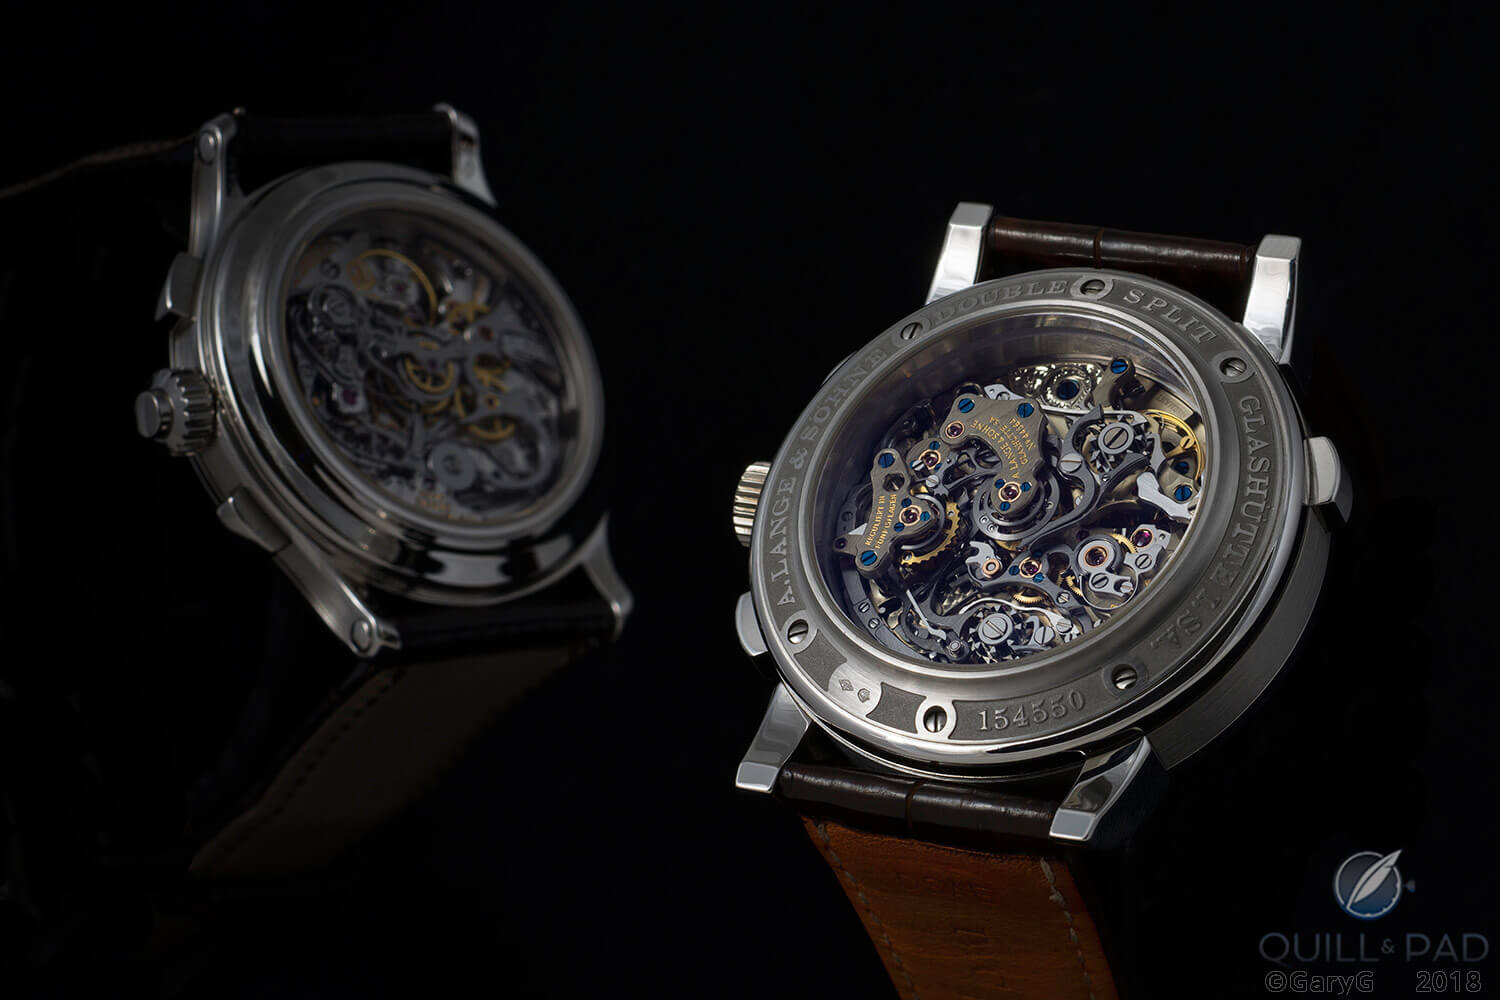 Out in front: the Double Split from A. Lange & Söhne